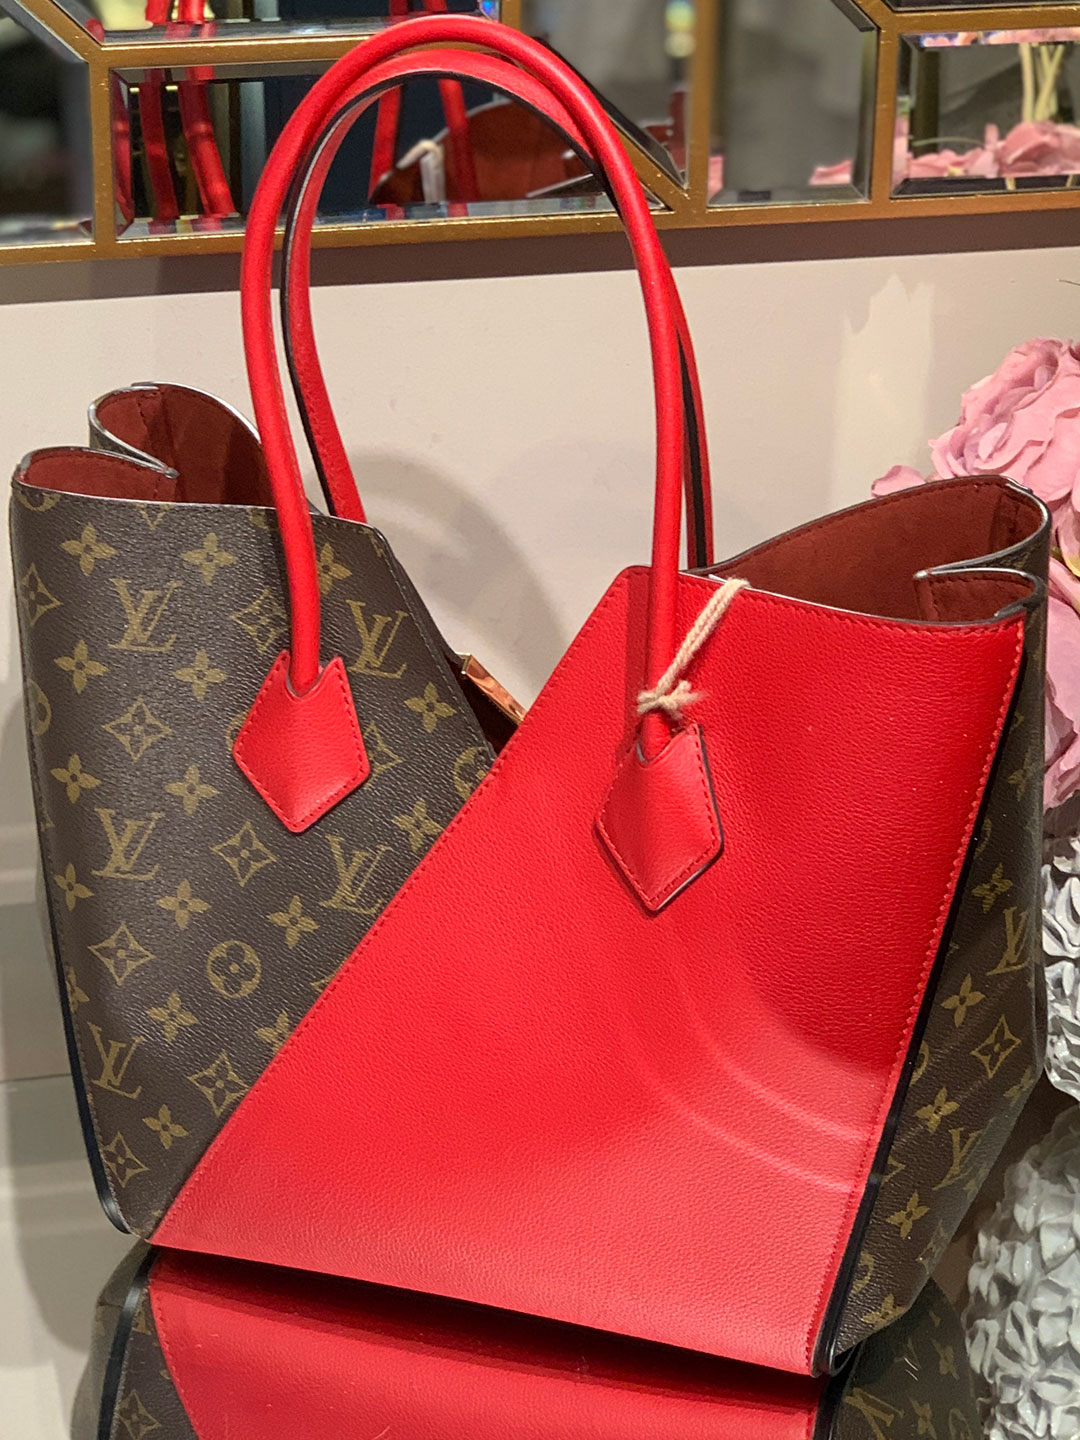 The Louis Vuitton Kimono Tote - a mix of traditional and a POP of color . # louisvuitton #luxuryhandbags #shoppreowned